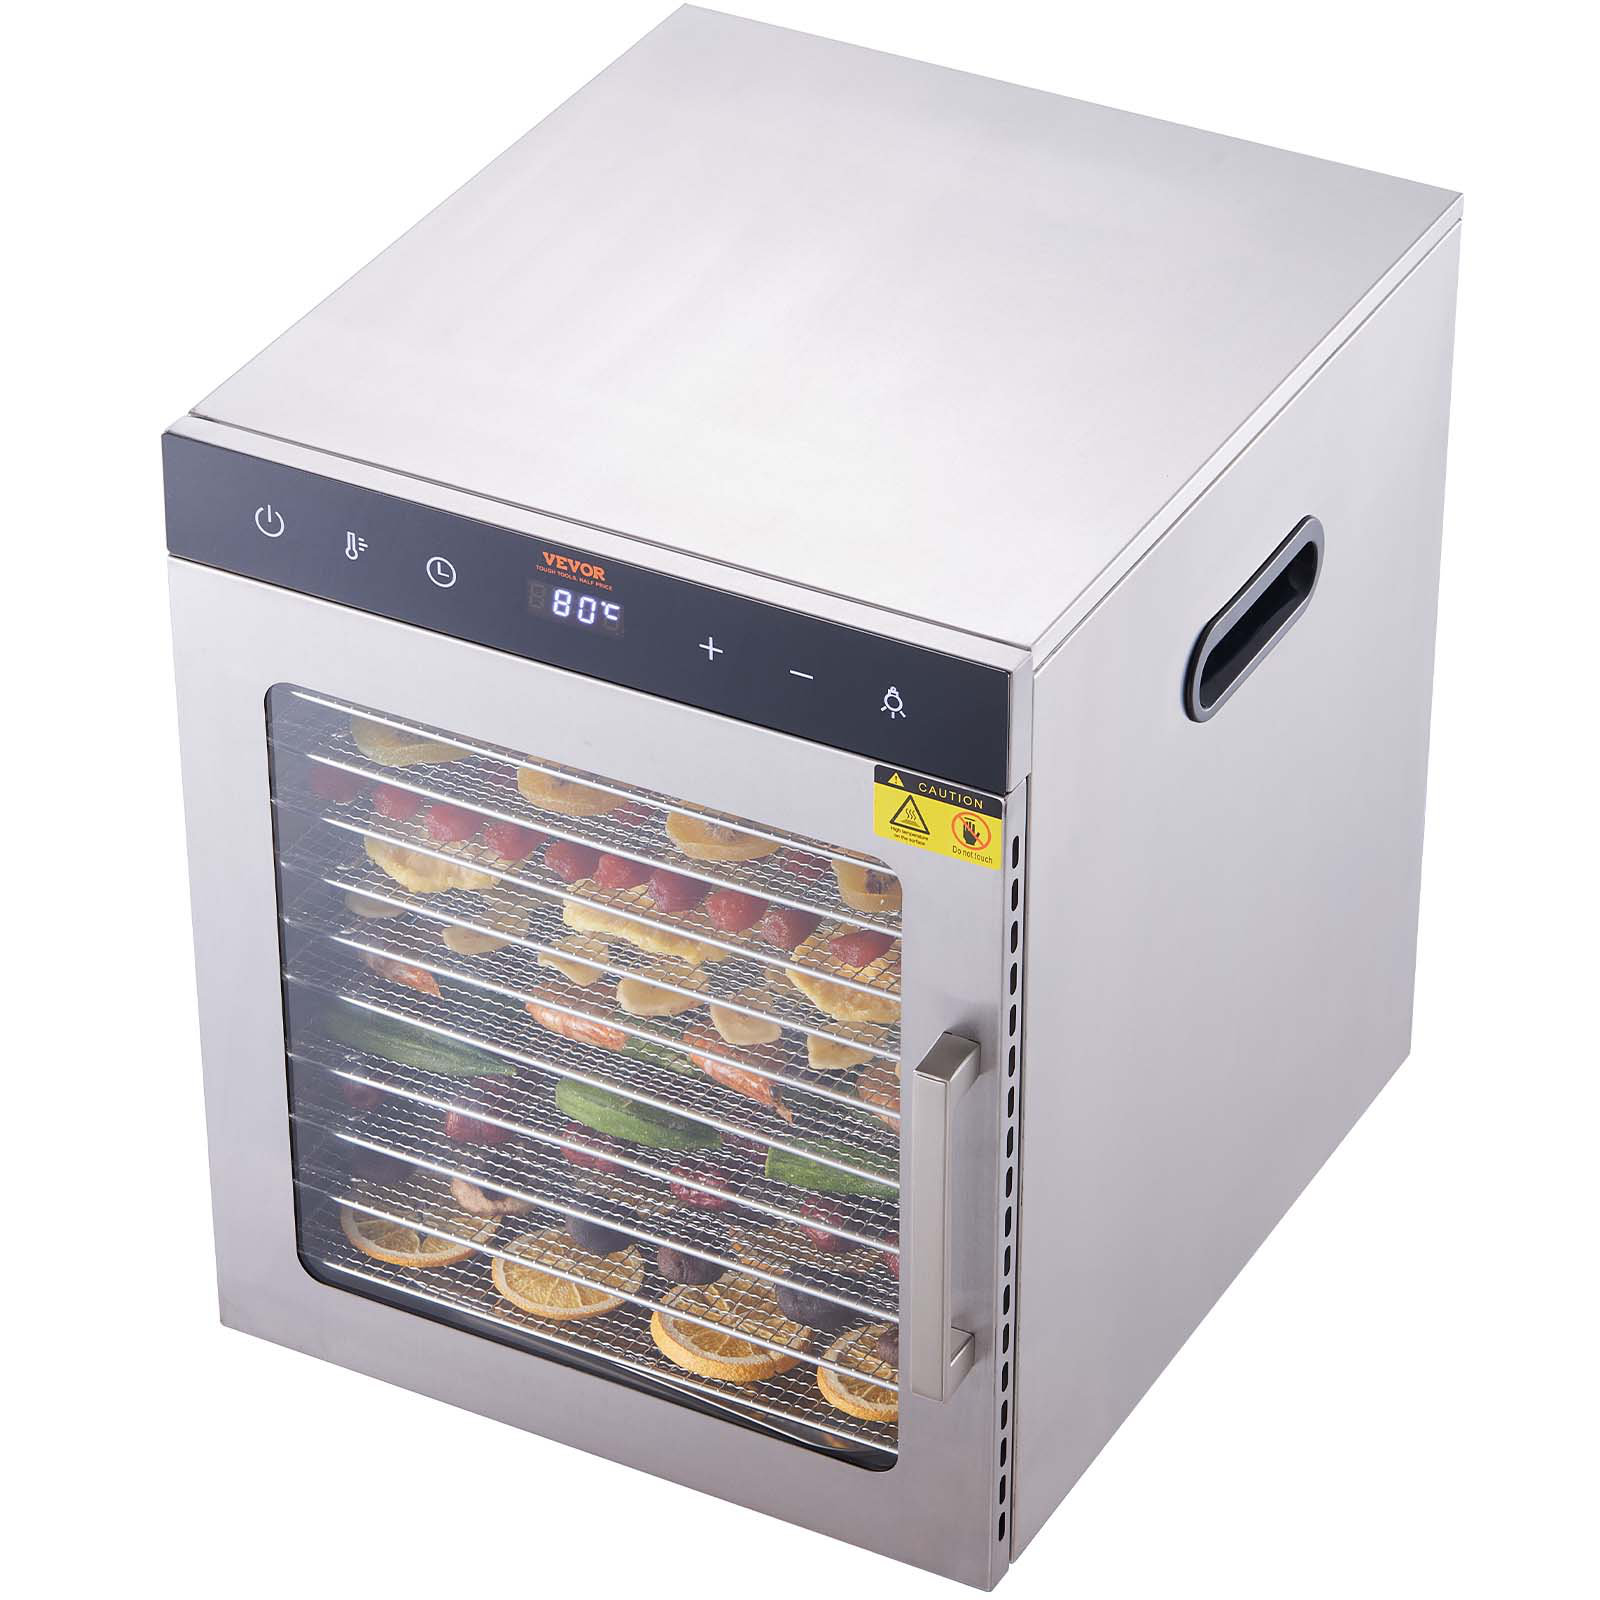 Fruit Dryer Food Dehydrator Dryer 8/12 Layers Commercial Household  Vegetables Pet Snacks Stainless Steel Food Dryer LED Display